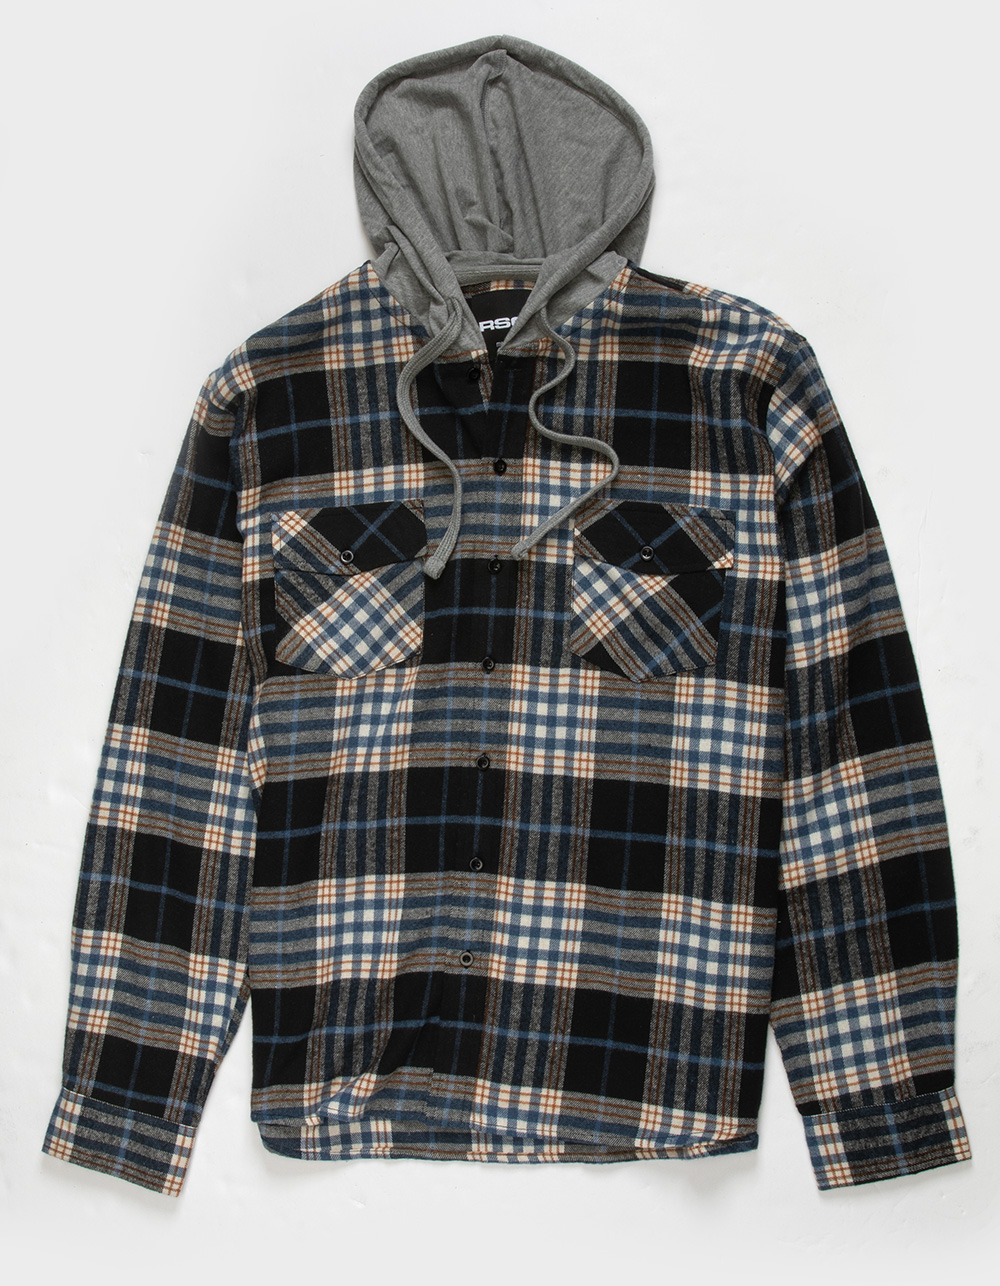 RSQ Mens Plaid Hooded Flannel - BLK/BLUE | Tillys